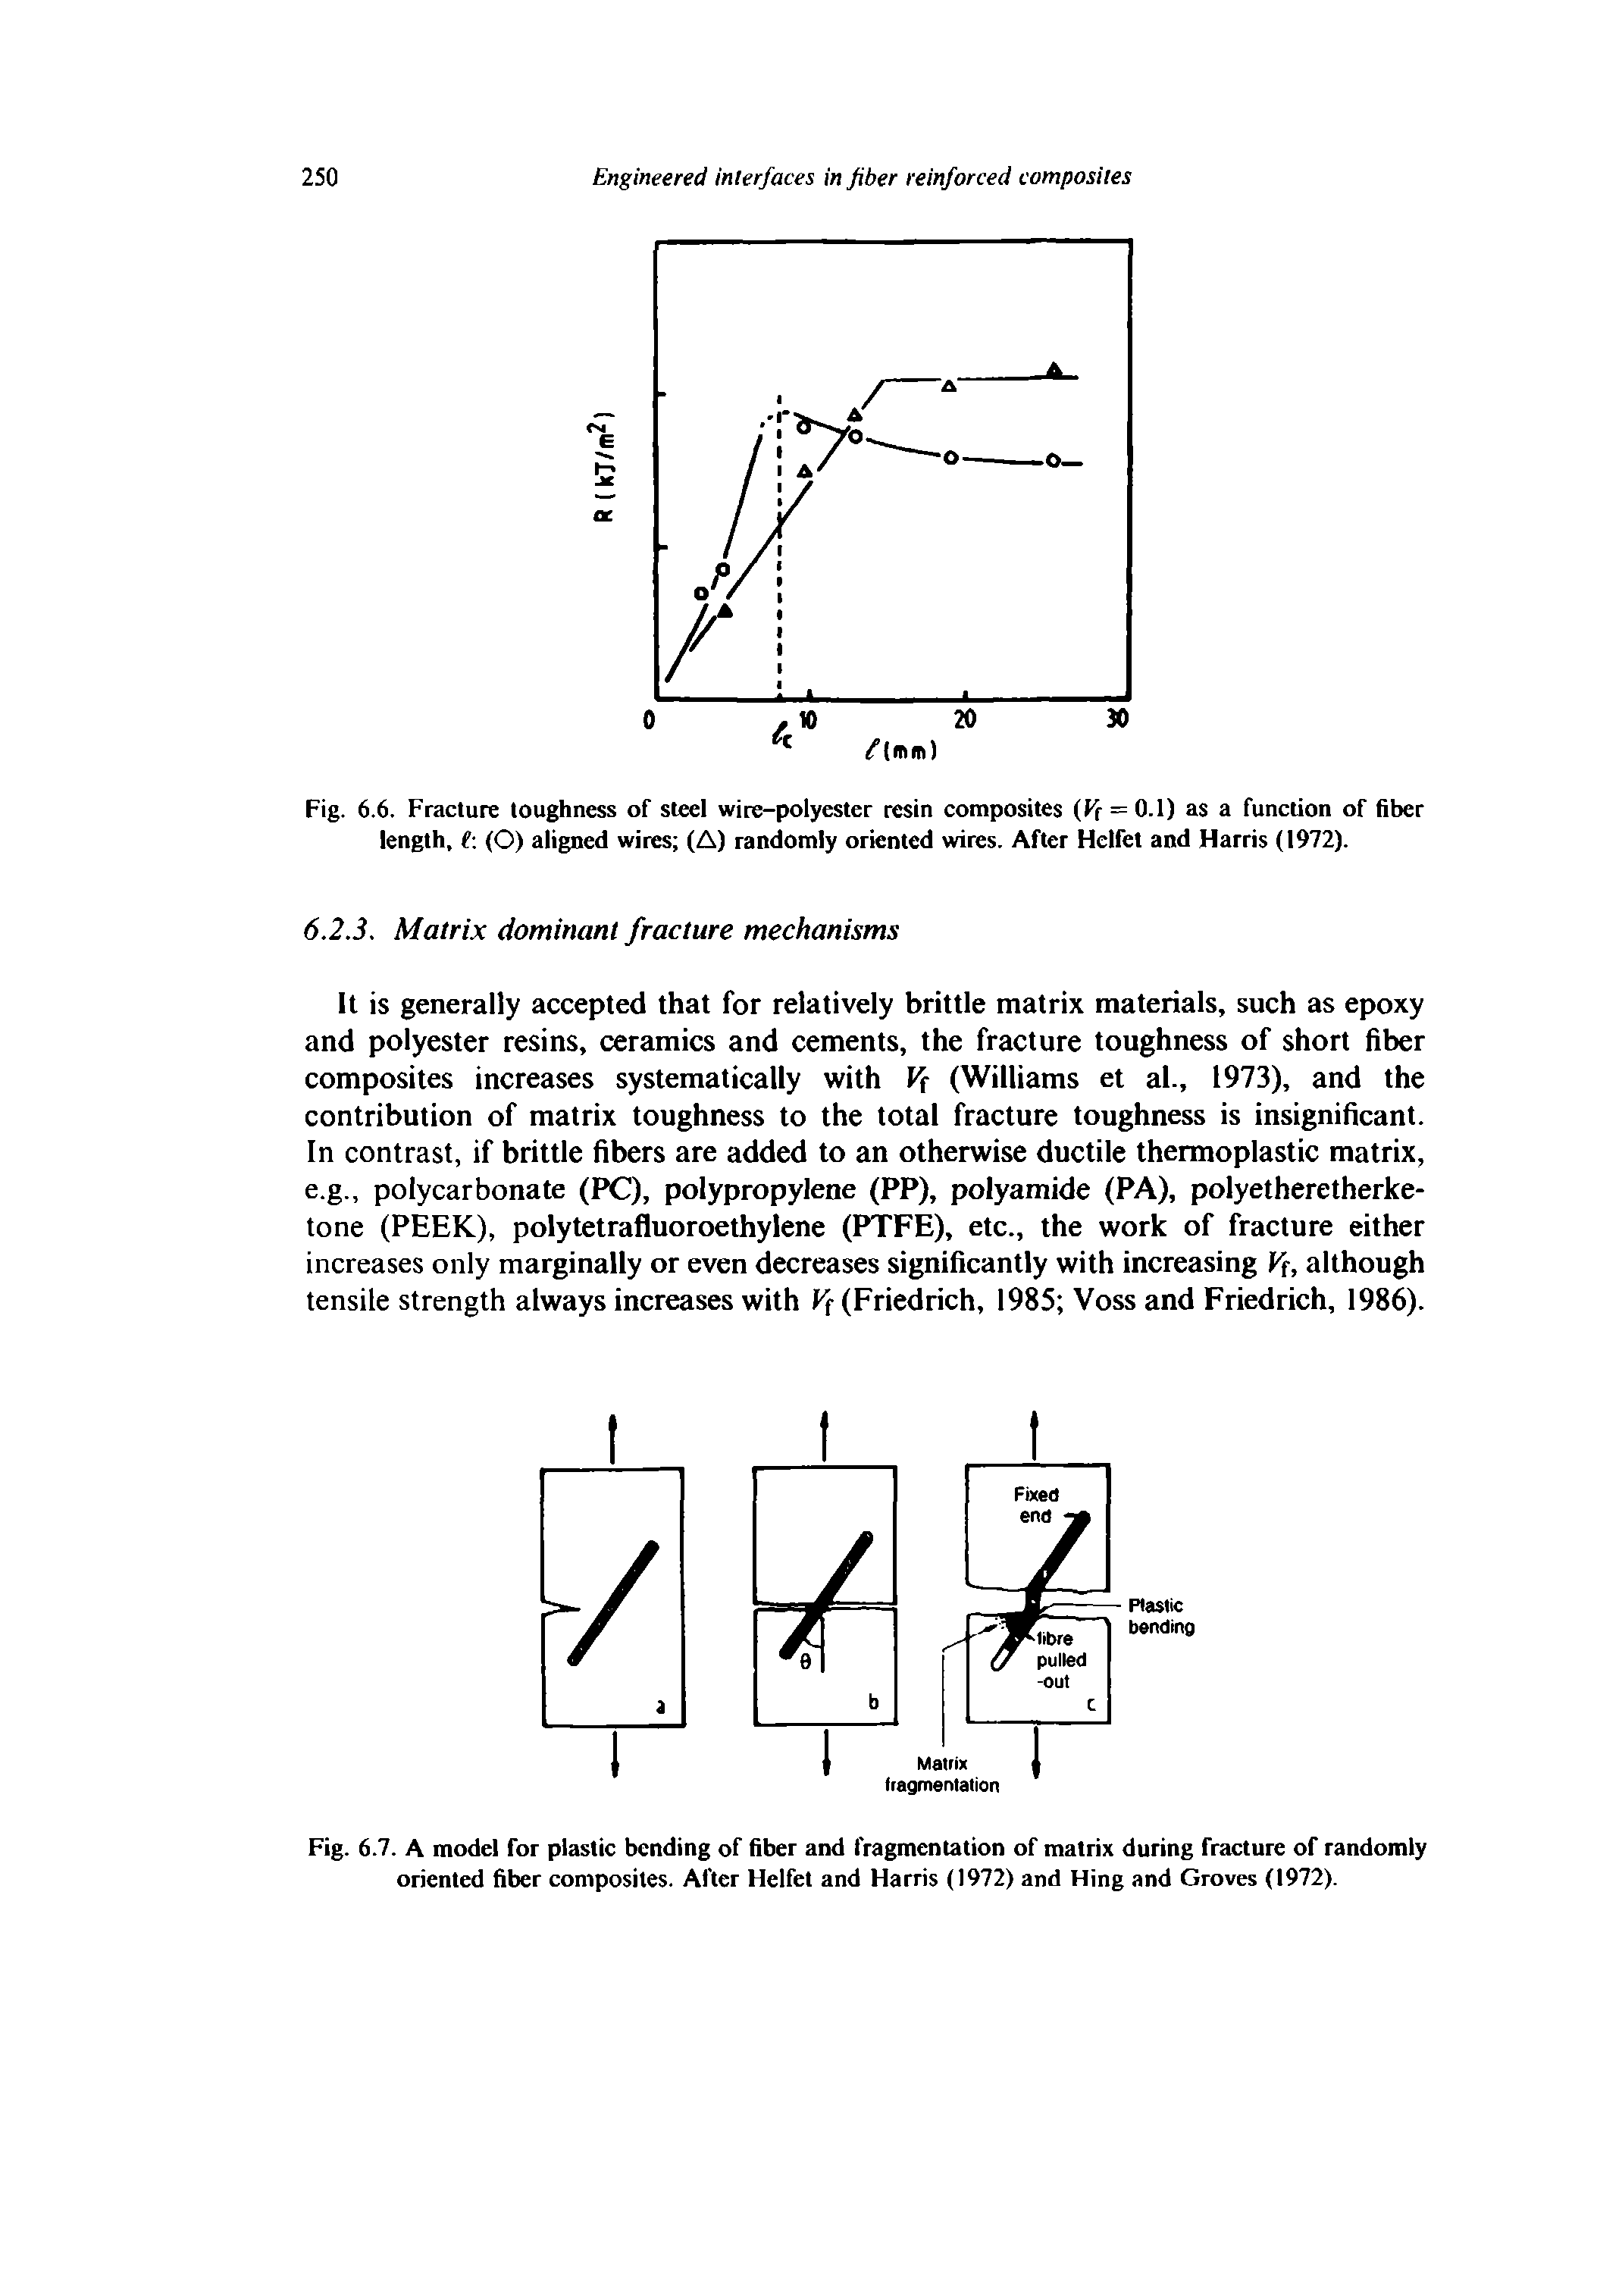 Fig. 6.7. A model for plastic bending of fiber and fragmentation of matrix during fracture of randomly oriented fiber composites. After Helfet and Harris (1972) and Hing and Groves (1972).